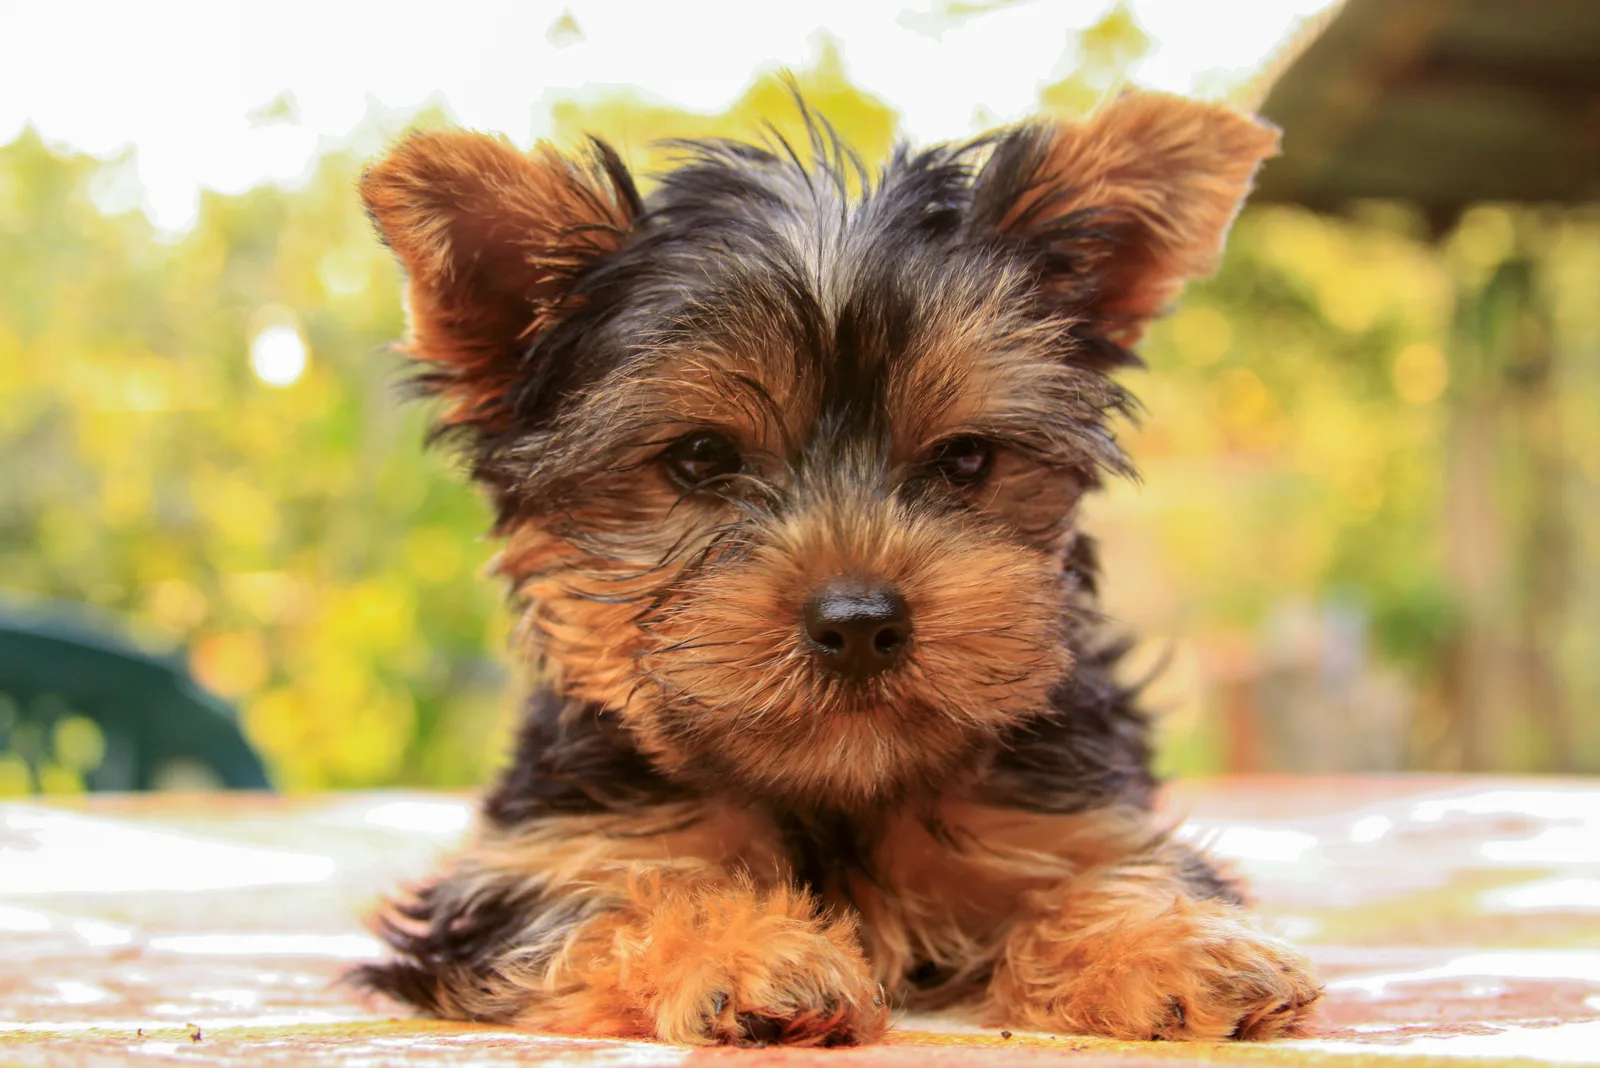 The Yorkshire Terrier lies down and rests